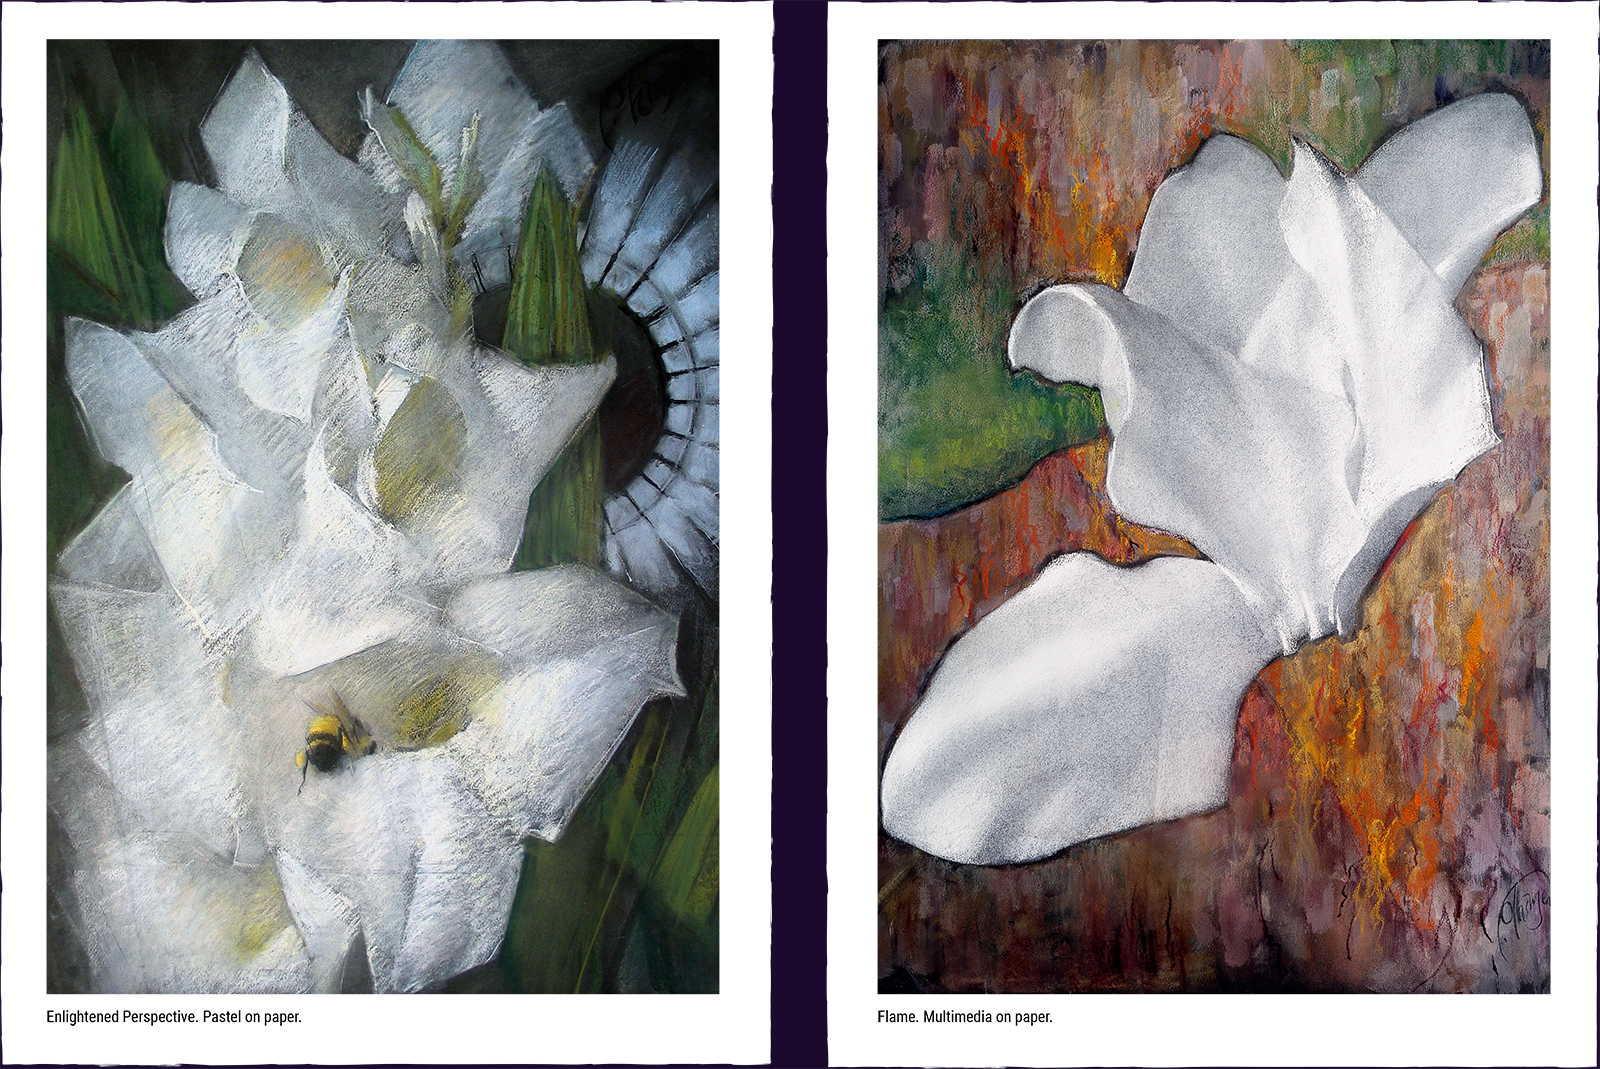 Two flower paintings. (1) Enlightened Perspective. Pastel on paper. (2) Flame. Multi media on paper.